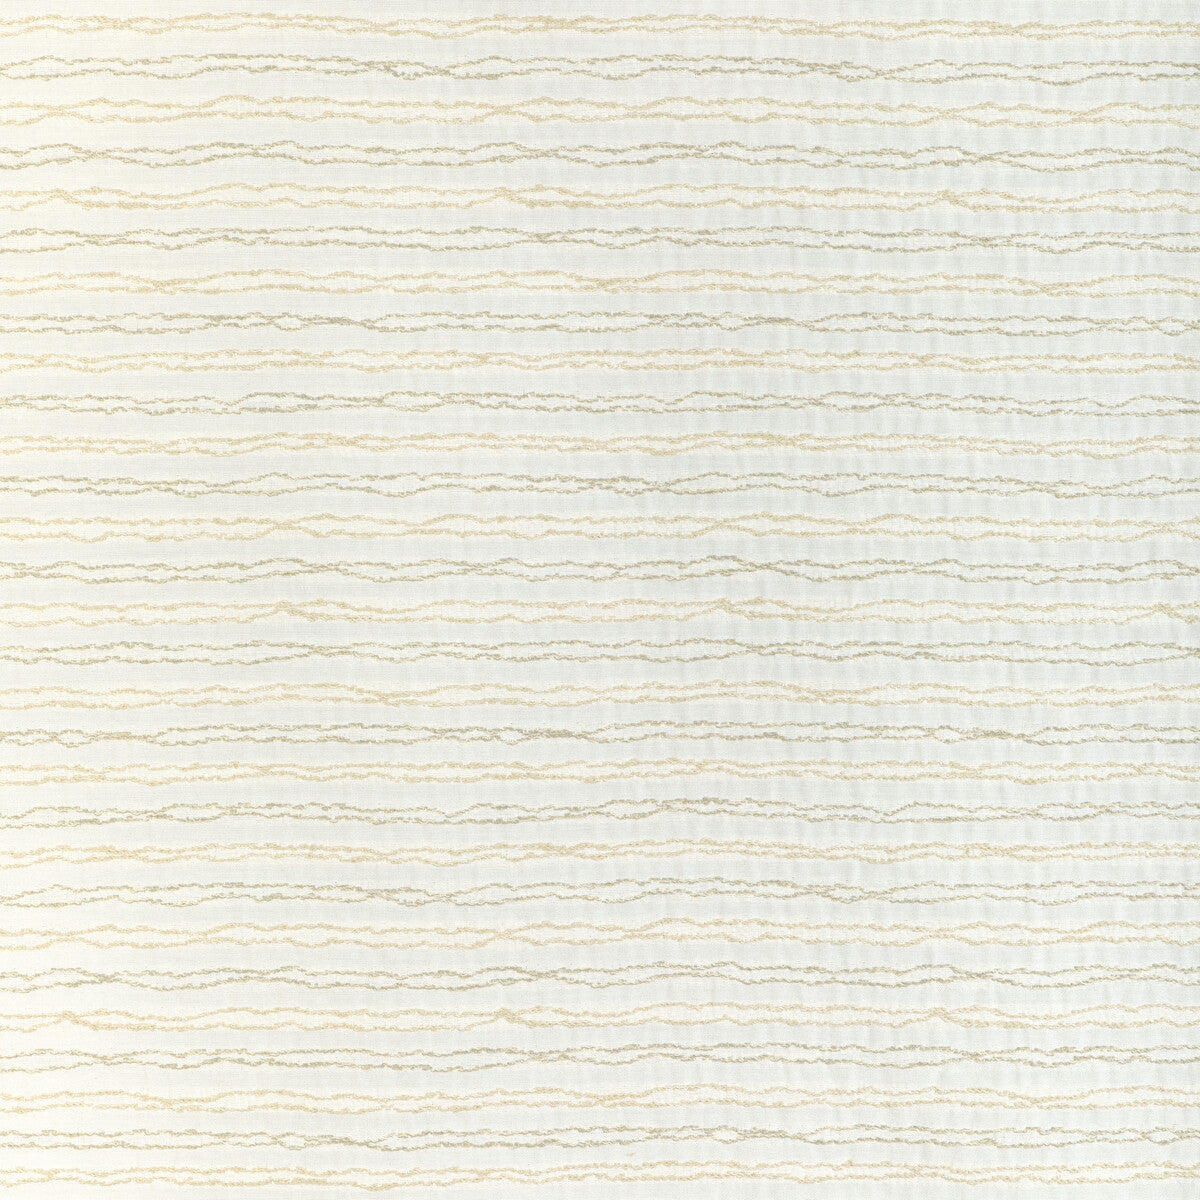 Wave Length fabric in chalk color - pattern 37057.1.0 - by Kravet Design in the Thom Filicia Latitude collection